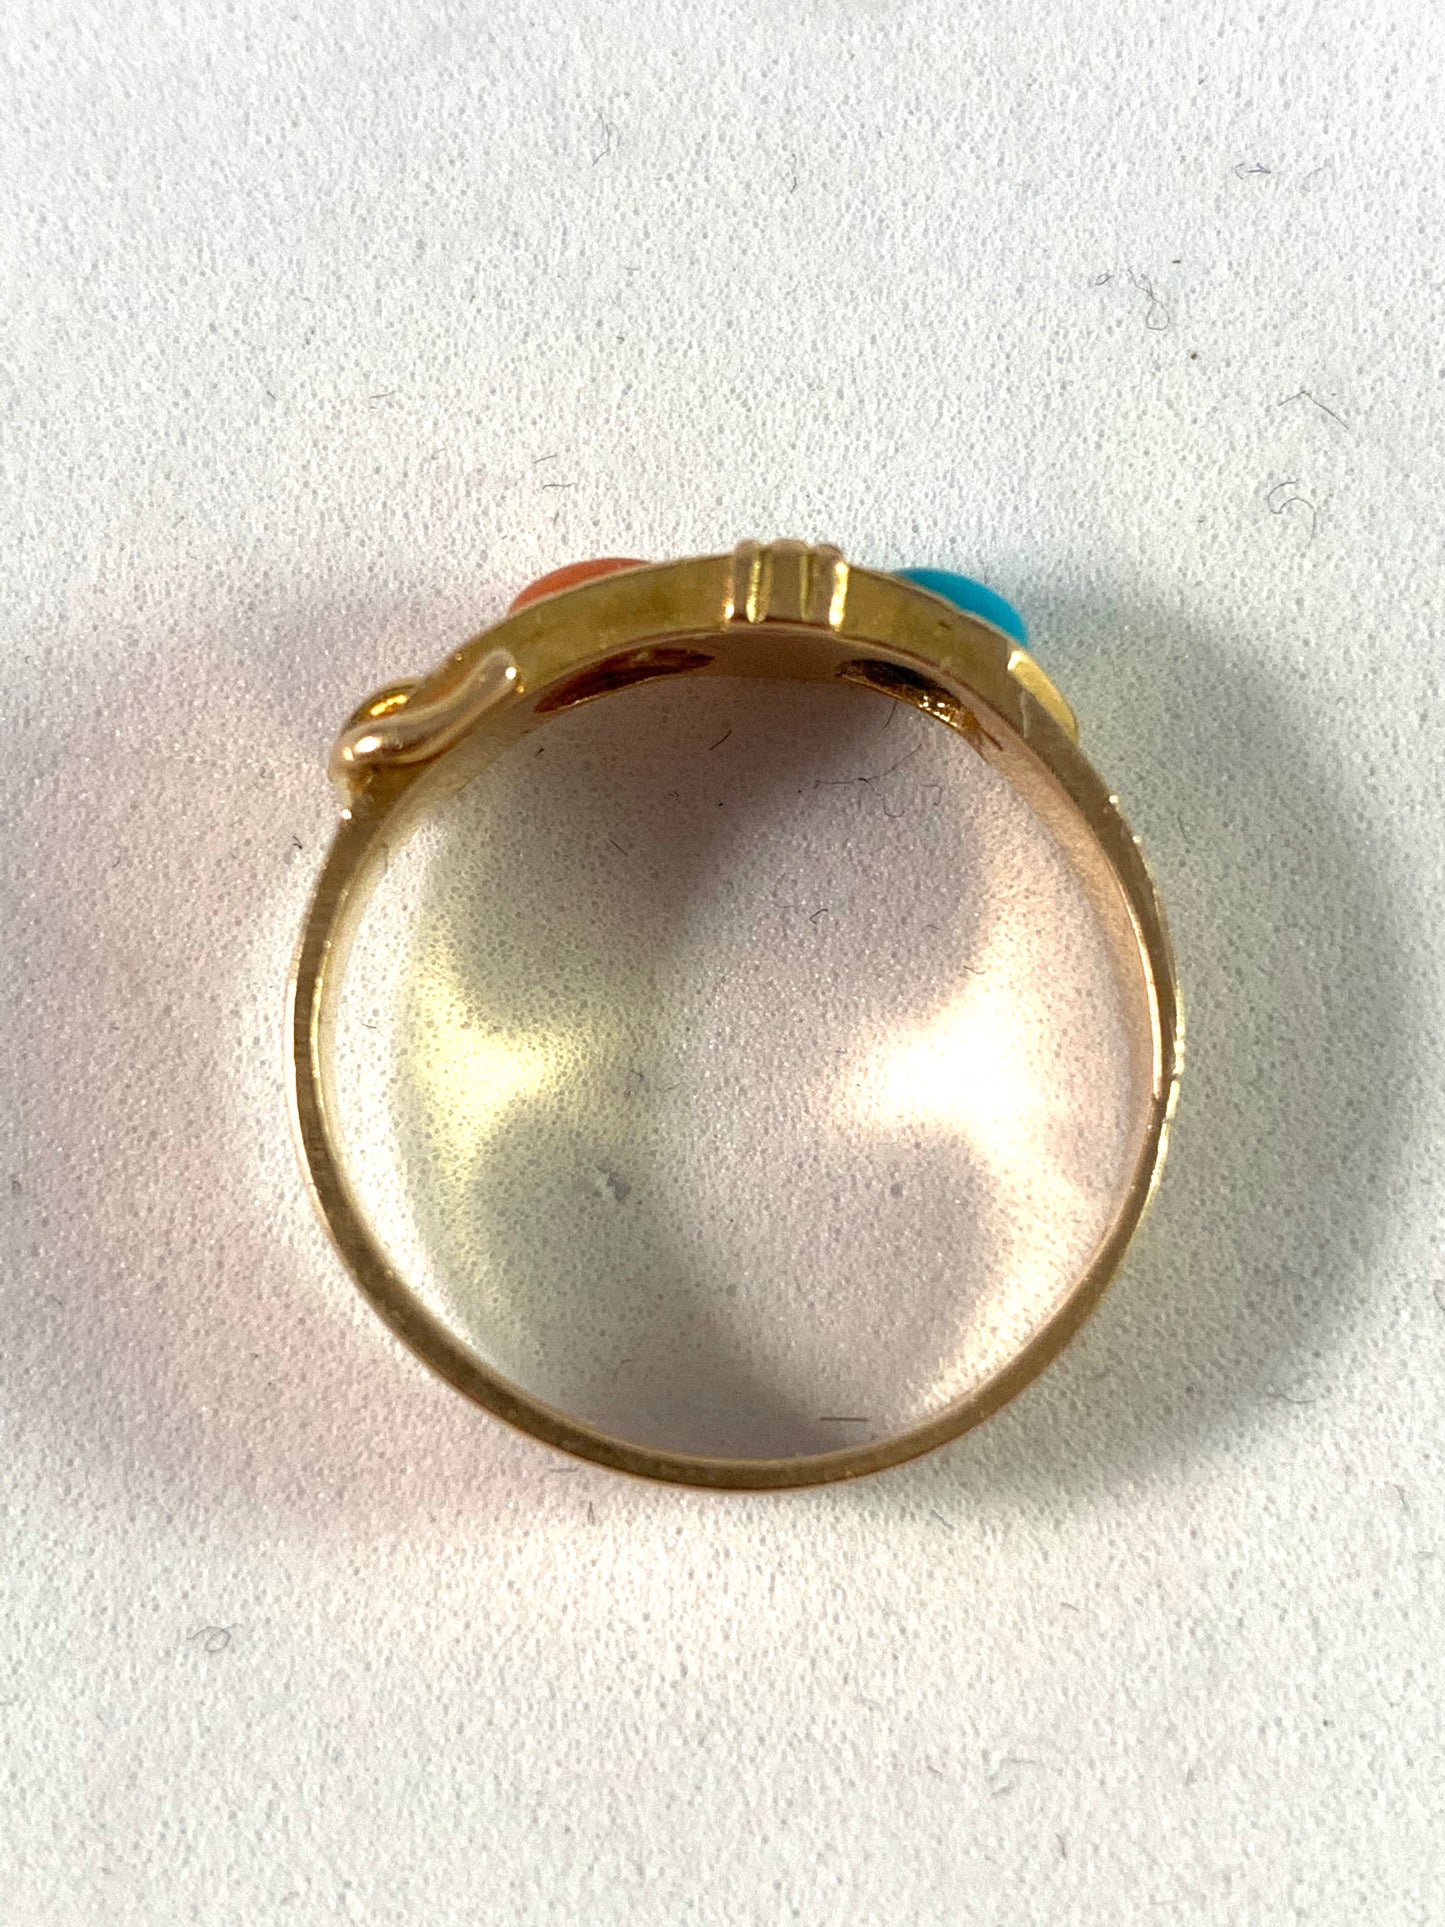 London 1861 Victorian 15k Gold Coral Turquoise Belt Buckle Ring.